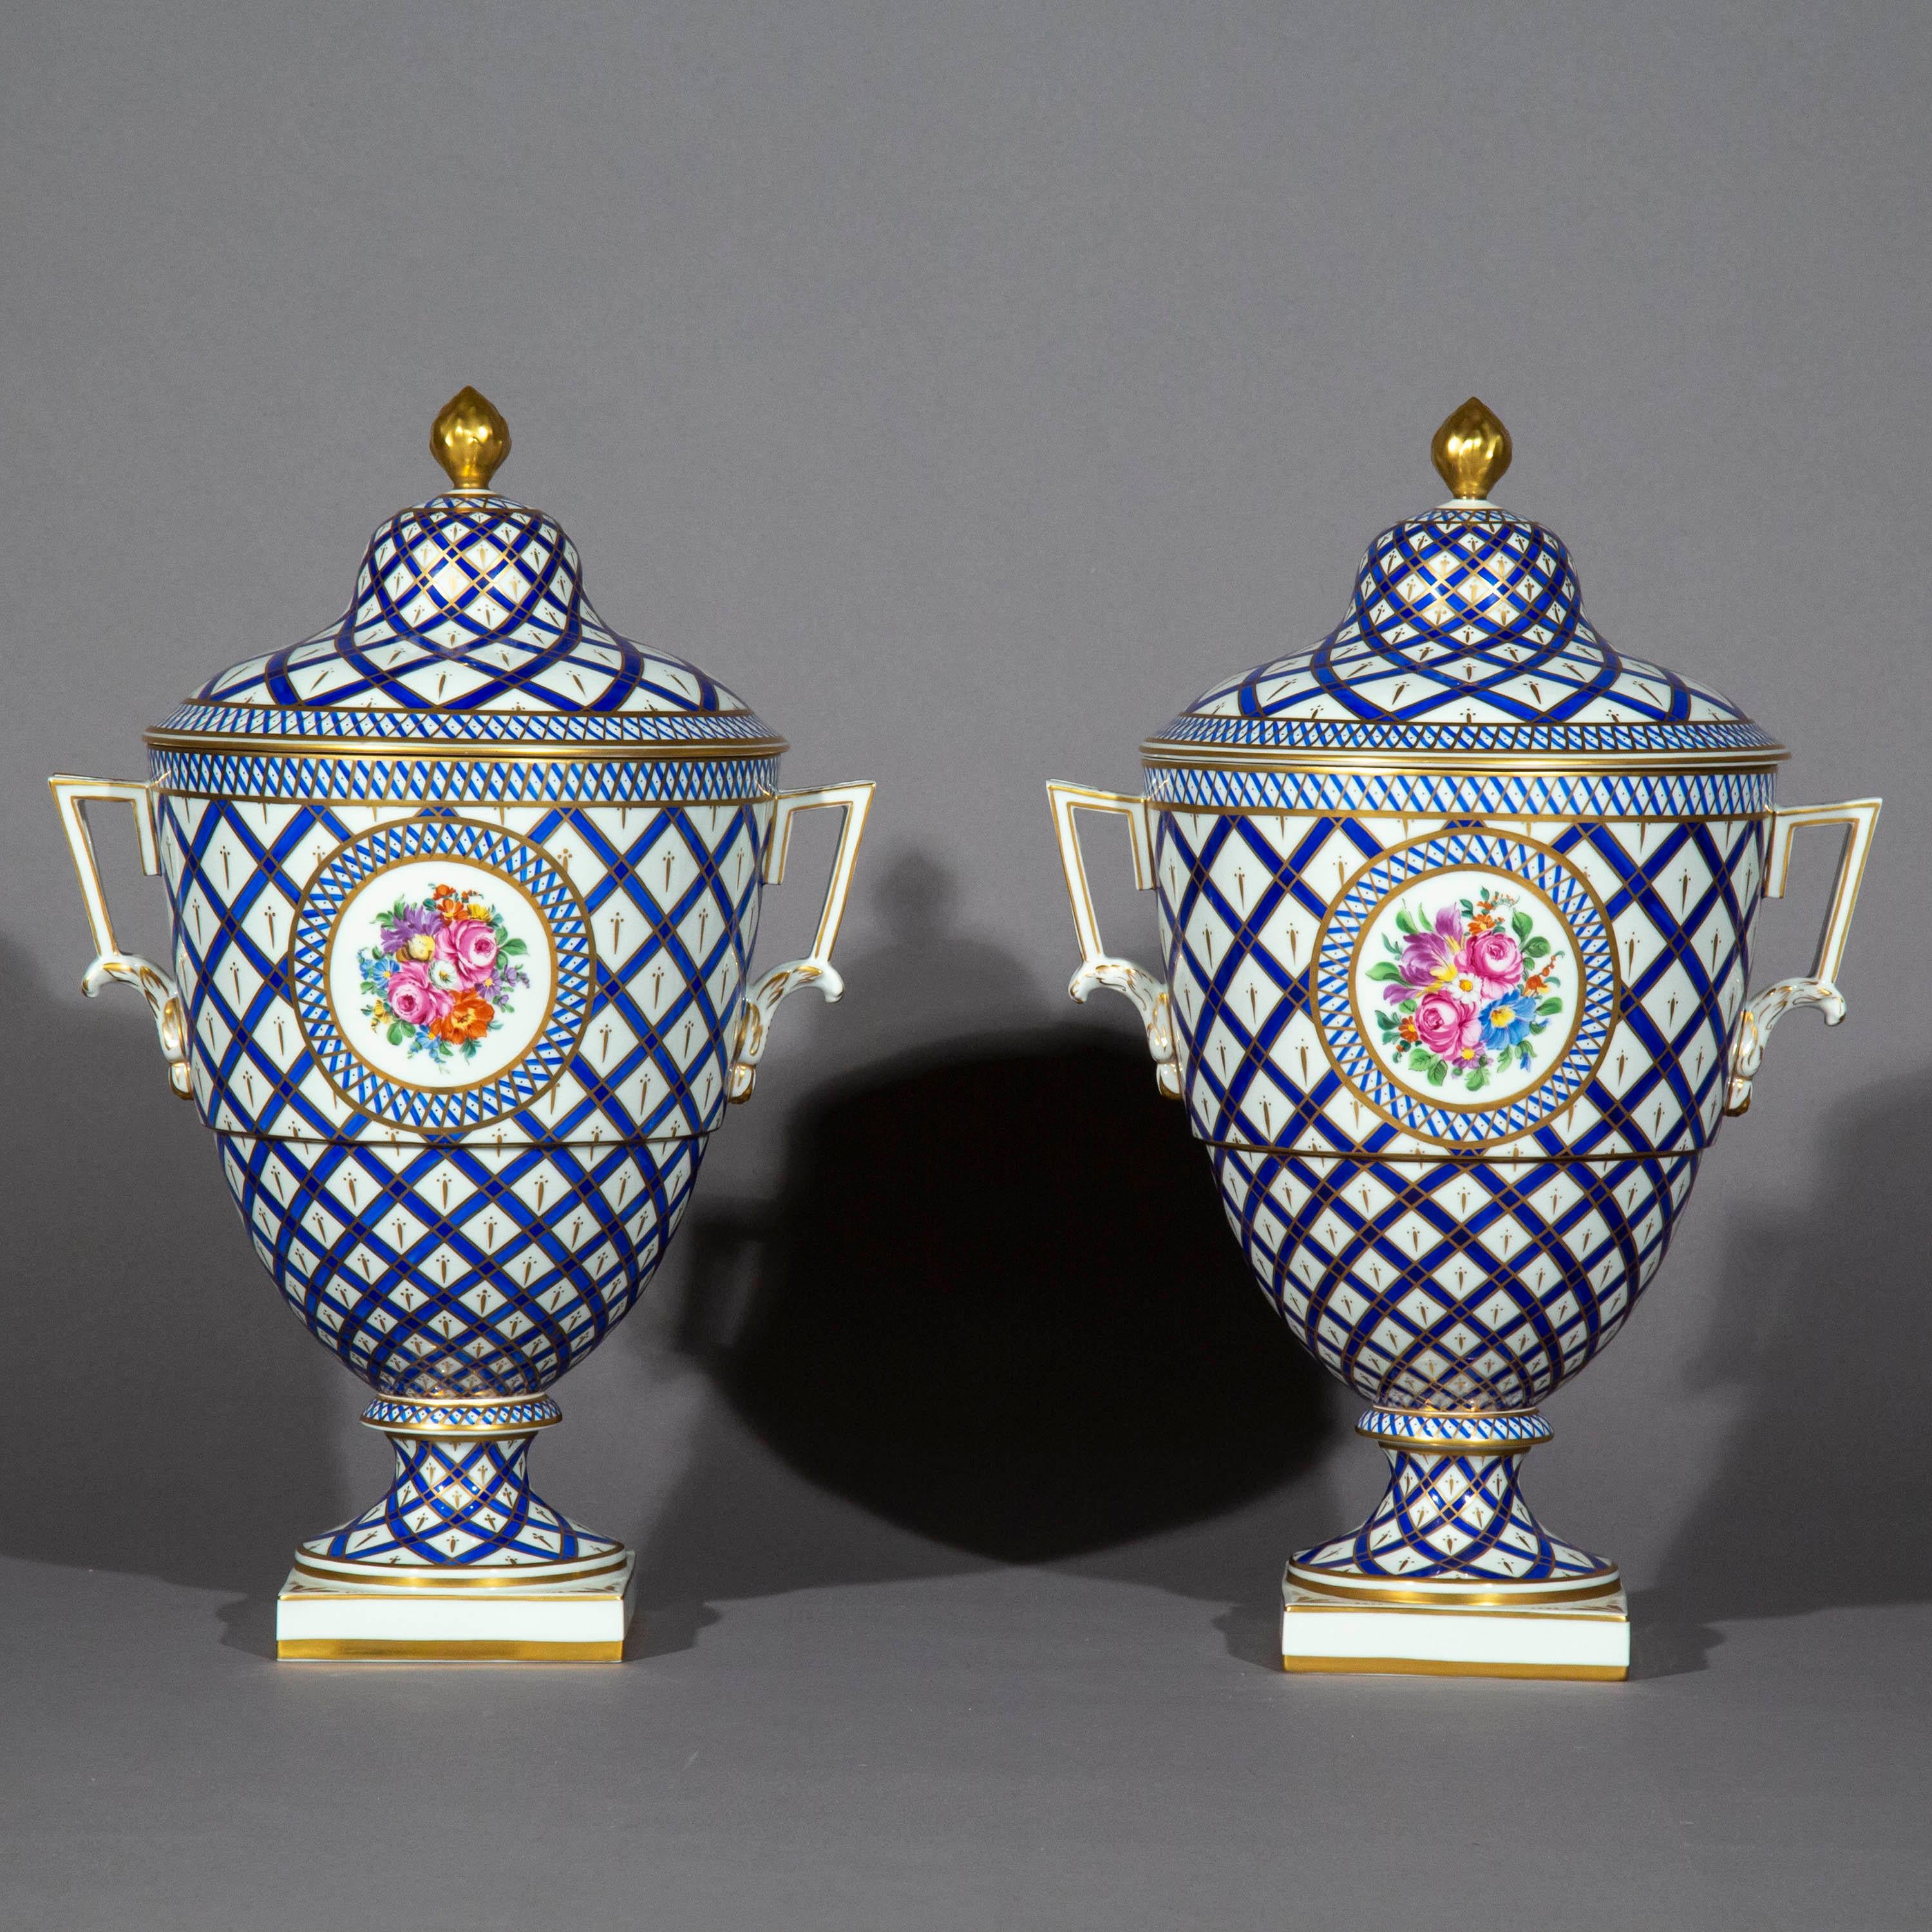 Pair of Hand-Painted Porcelain Vases in the Neoclassical Style For Sale 5